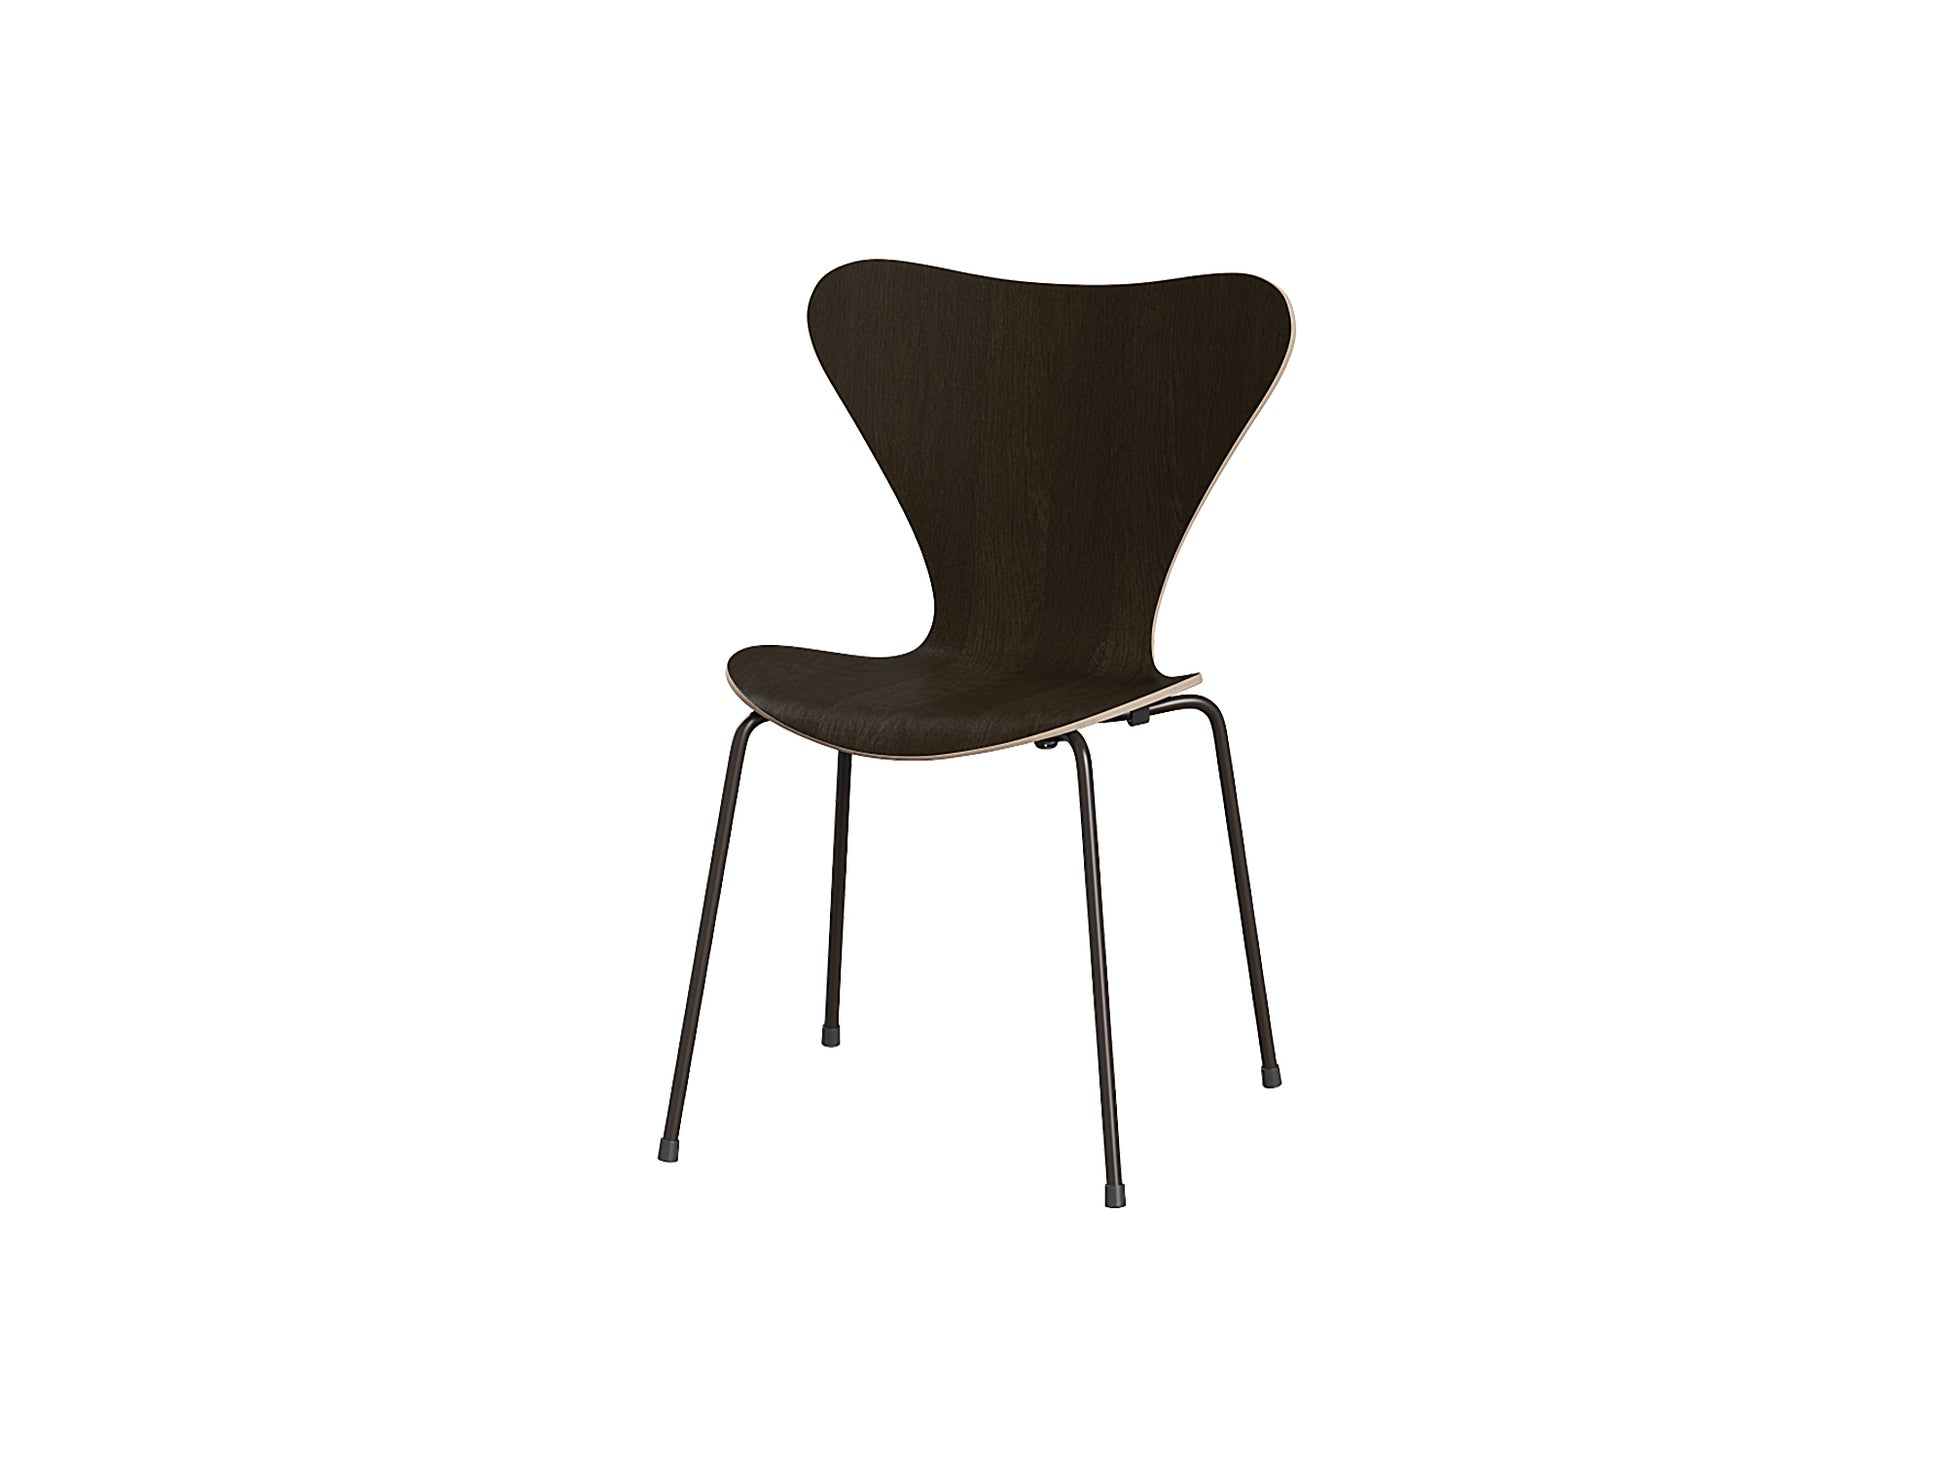 Series 7 Dining Chair (Clear Lacquered Wood) by Fritz Hanse - Dark Stained Oak / Brown Bronze Steel